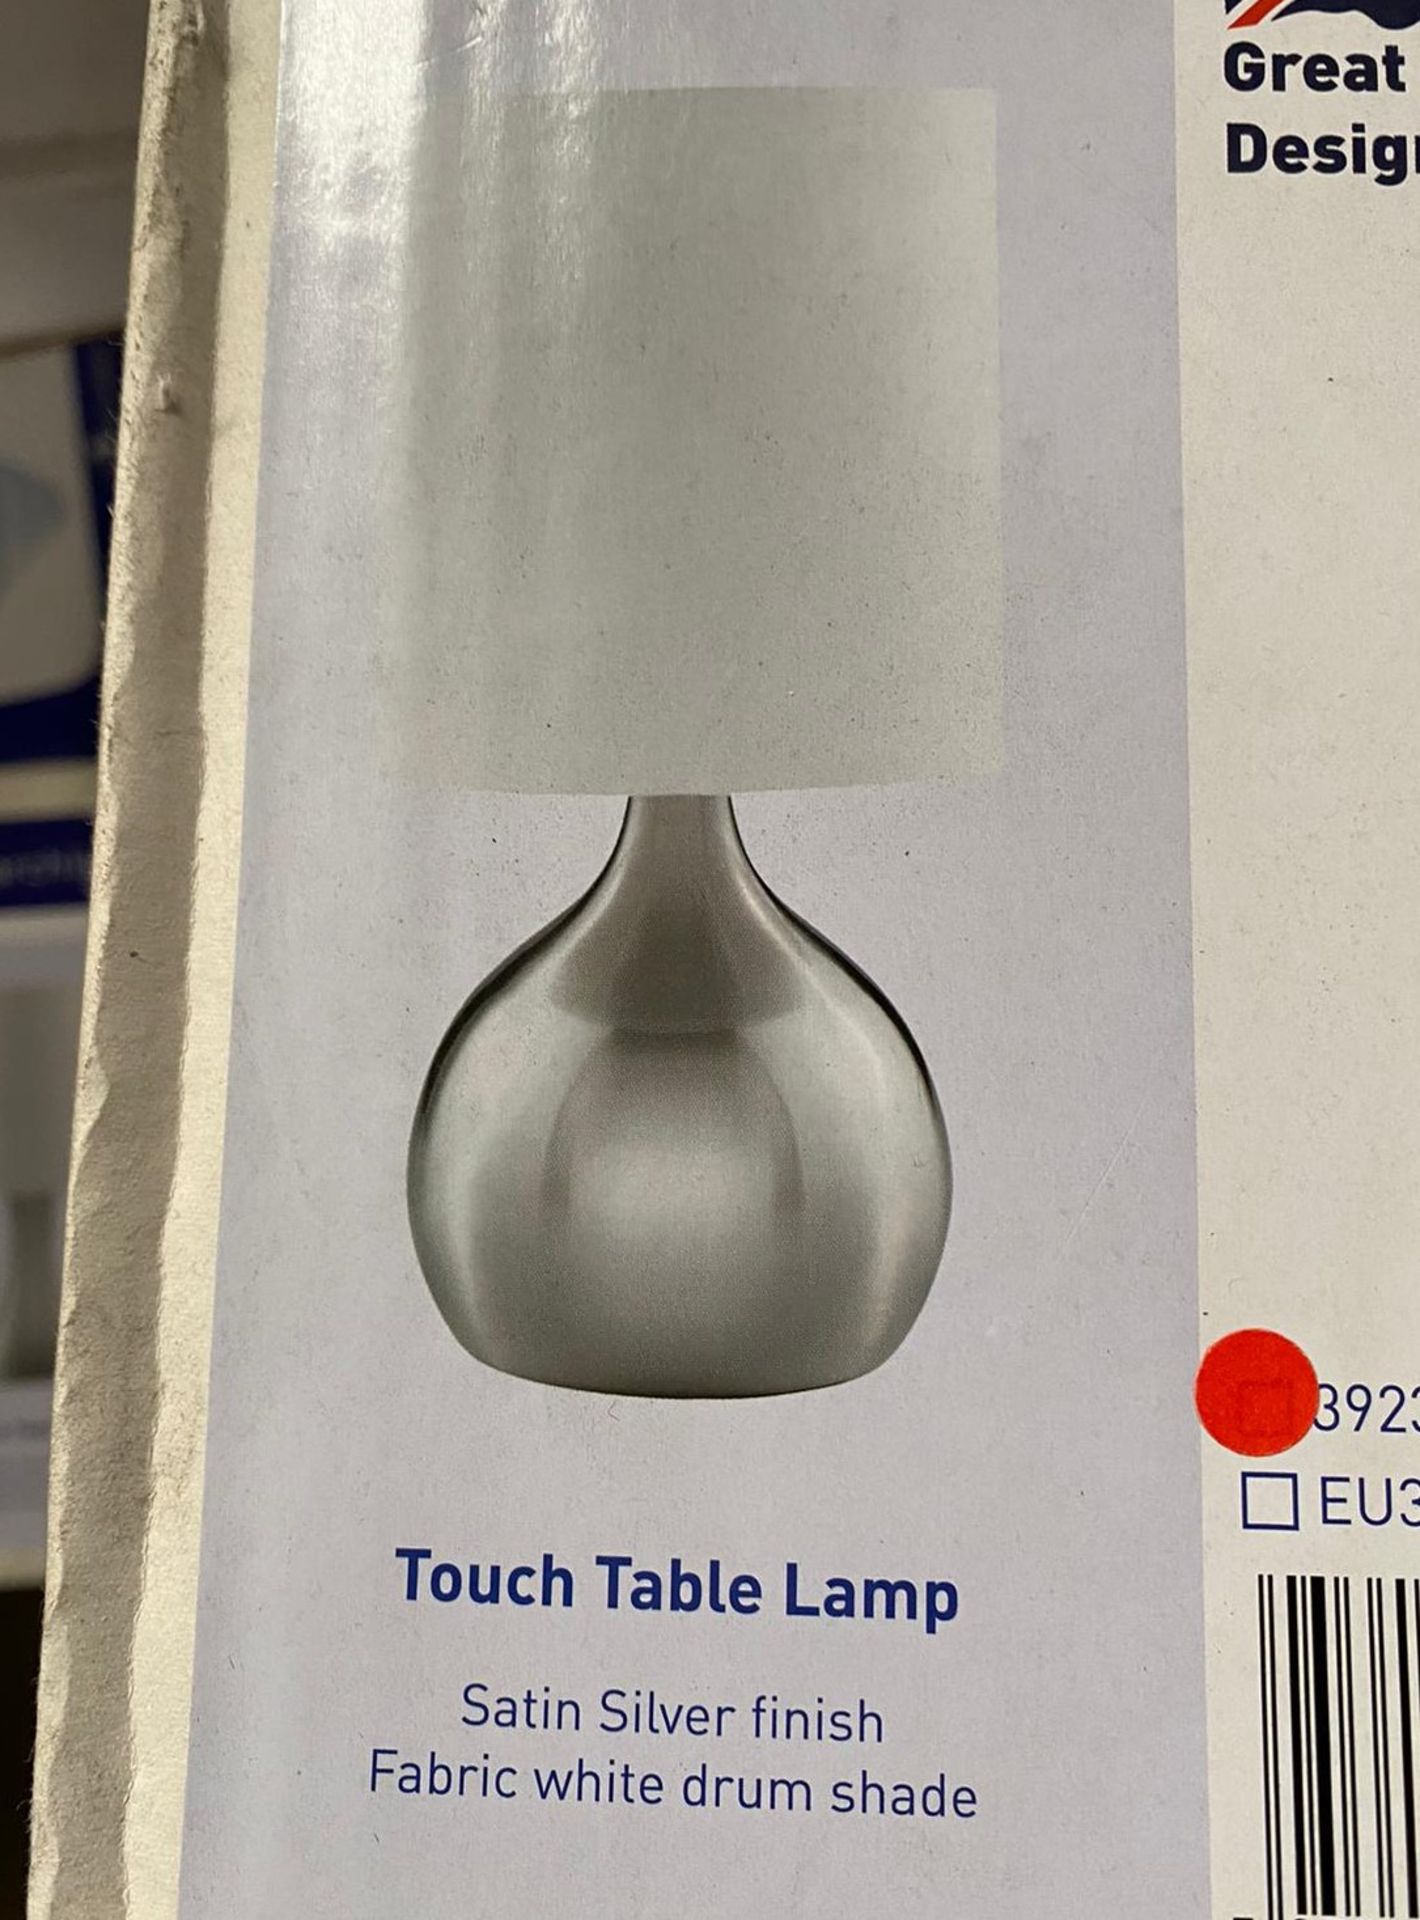 1 x Searchlight Touch Table Lamp in satin silver - Ref: 3923SS - New and Boxed Stock - Image 4 of 4